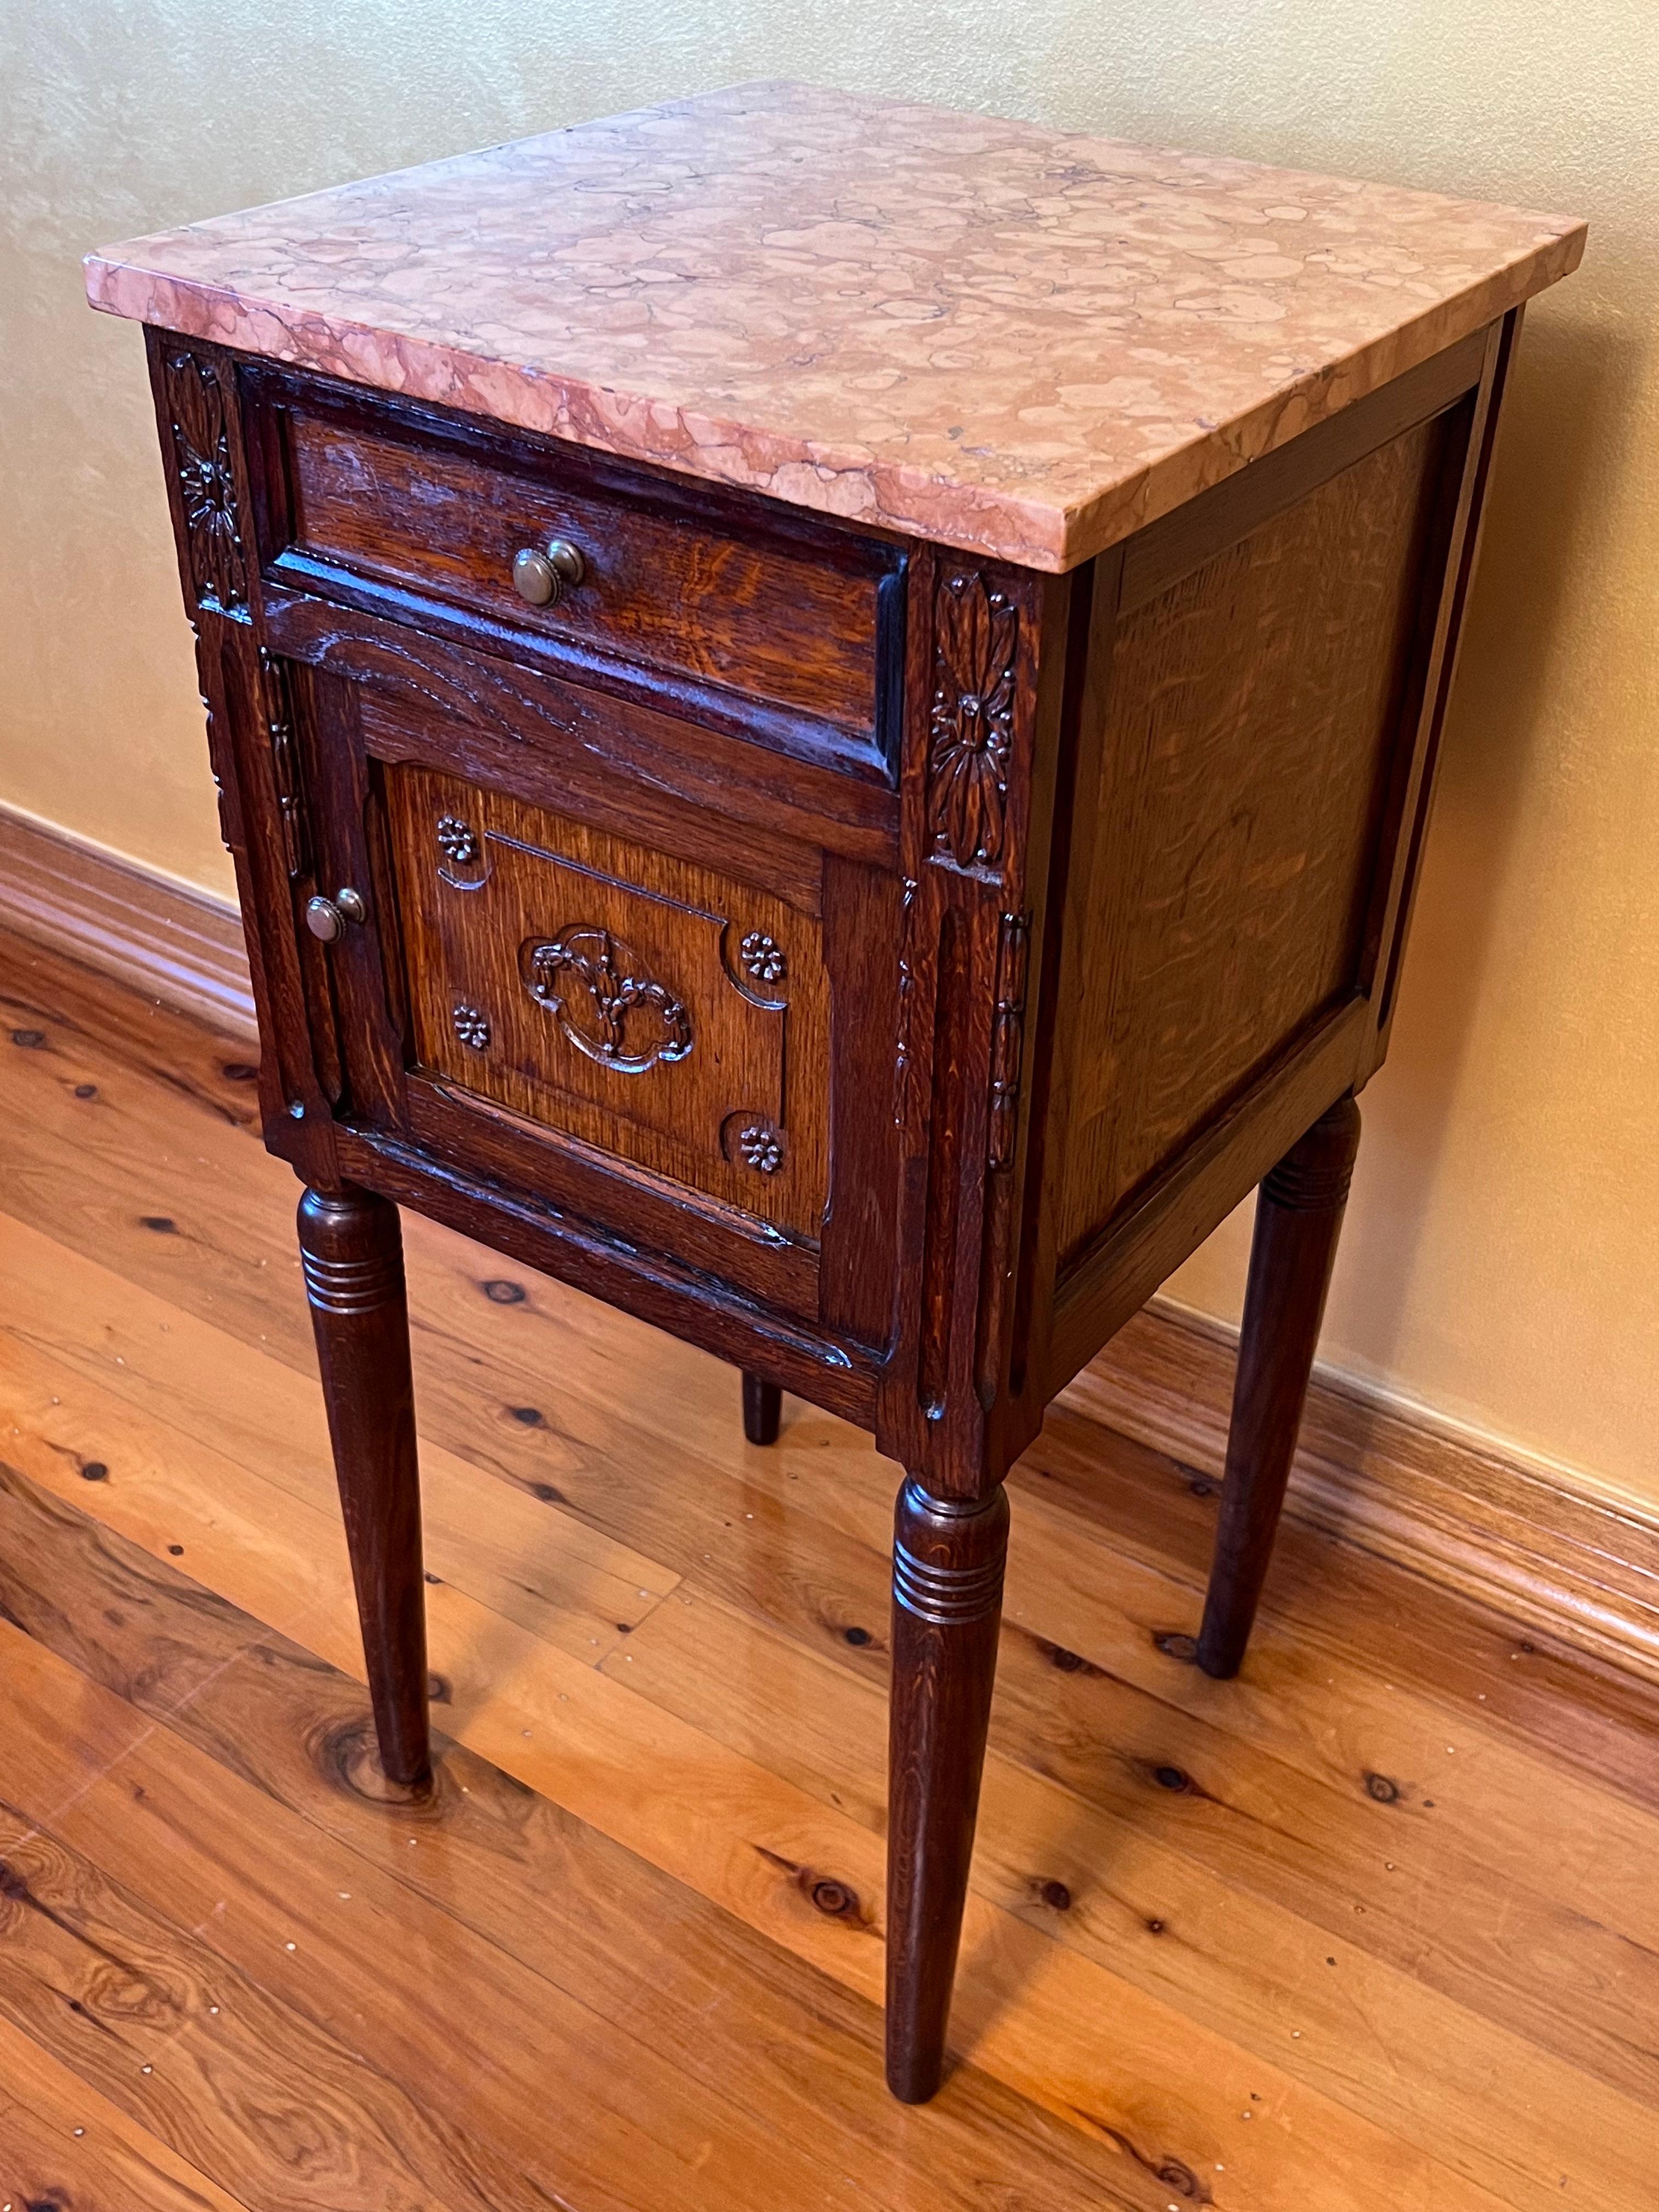 Marble topped nightstand, straight legs with ring carved detail, carved detail on front door cupboard and side pillars.

Circa: 19th Century

Material: Oak

Country of Origin: France

Measurements: 82.5cm high, 41cm width, 39cm depth